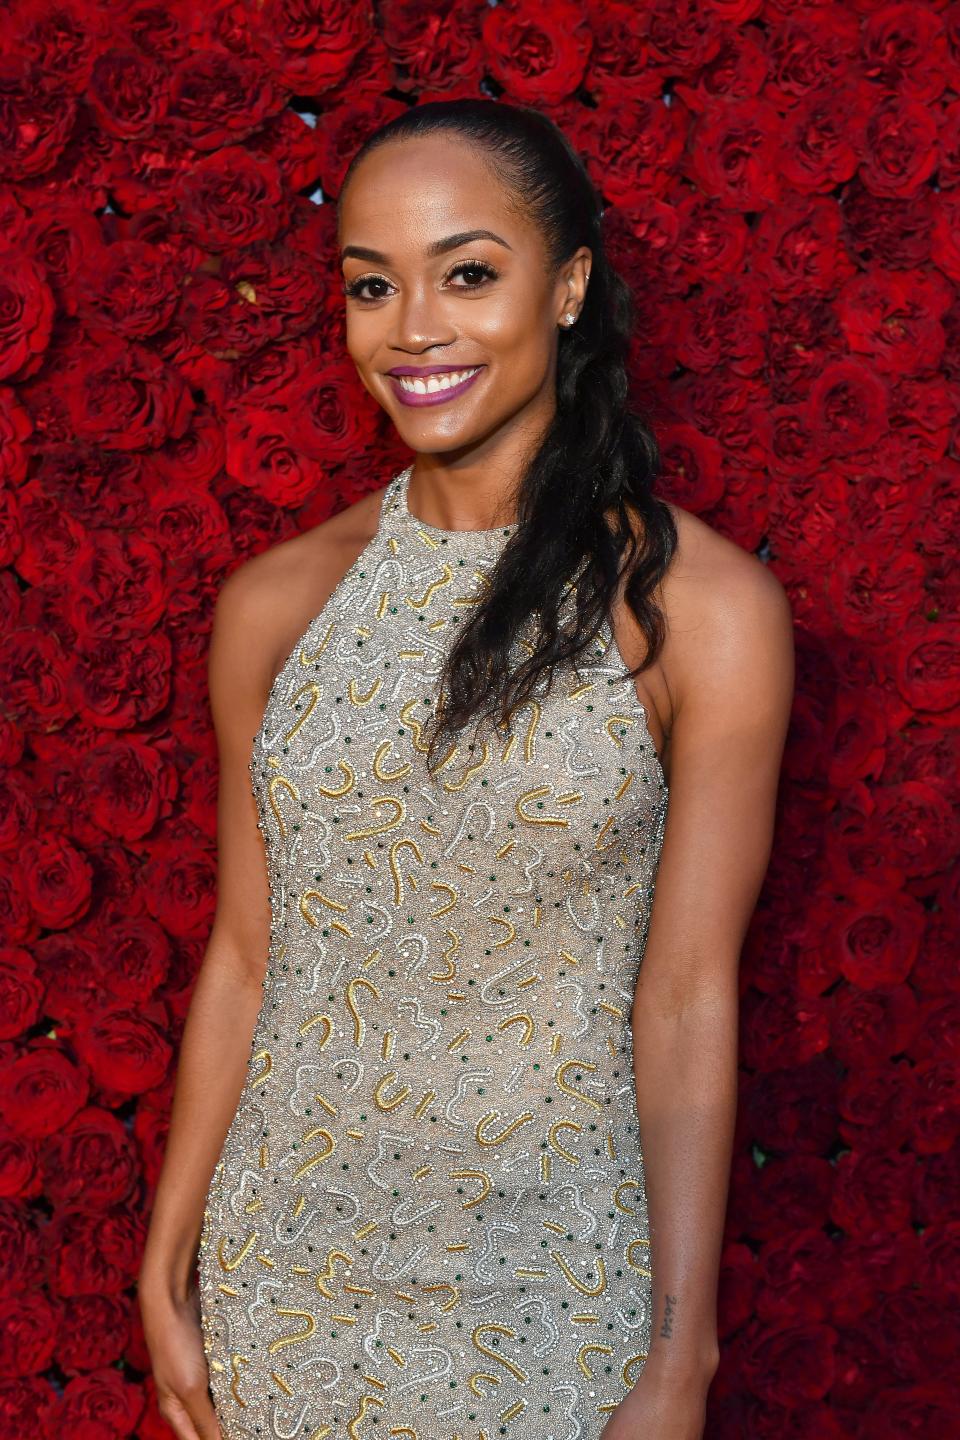 As the only female lead in the franchise, former Bachelorette Rachel Lindsay called attention to the show's lack of diversity and representation.